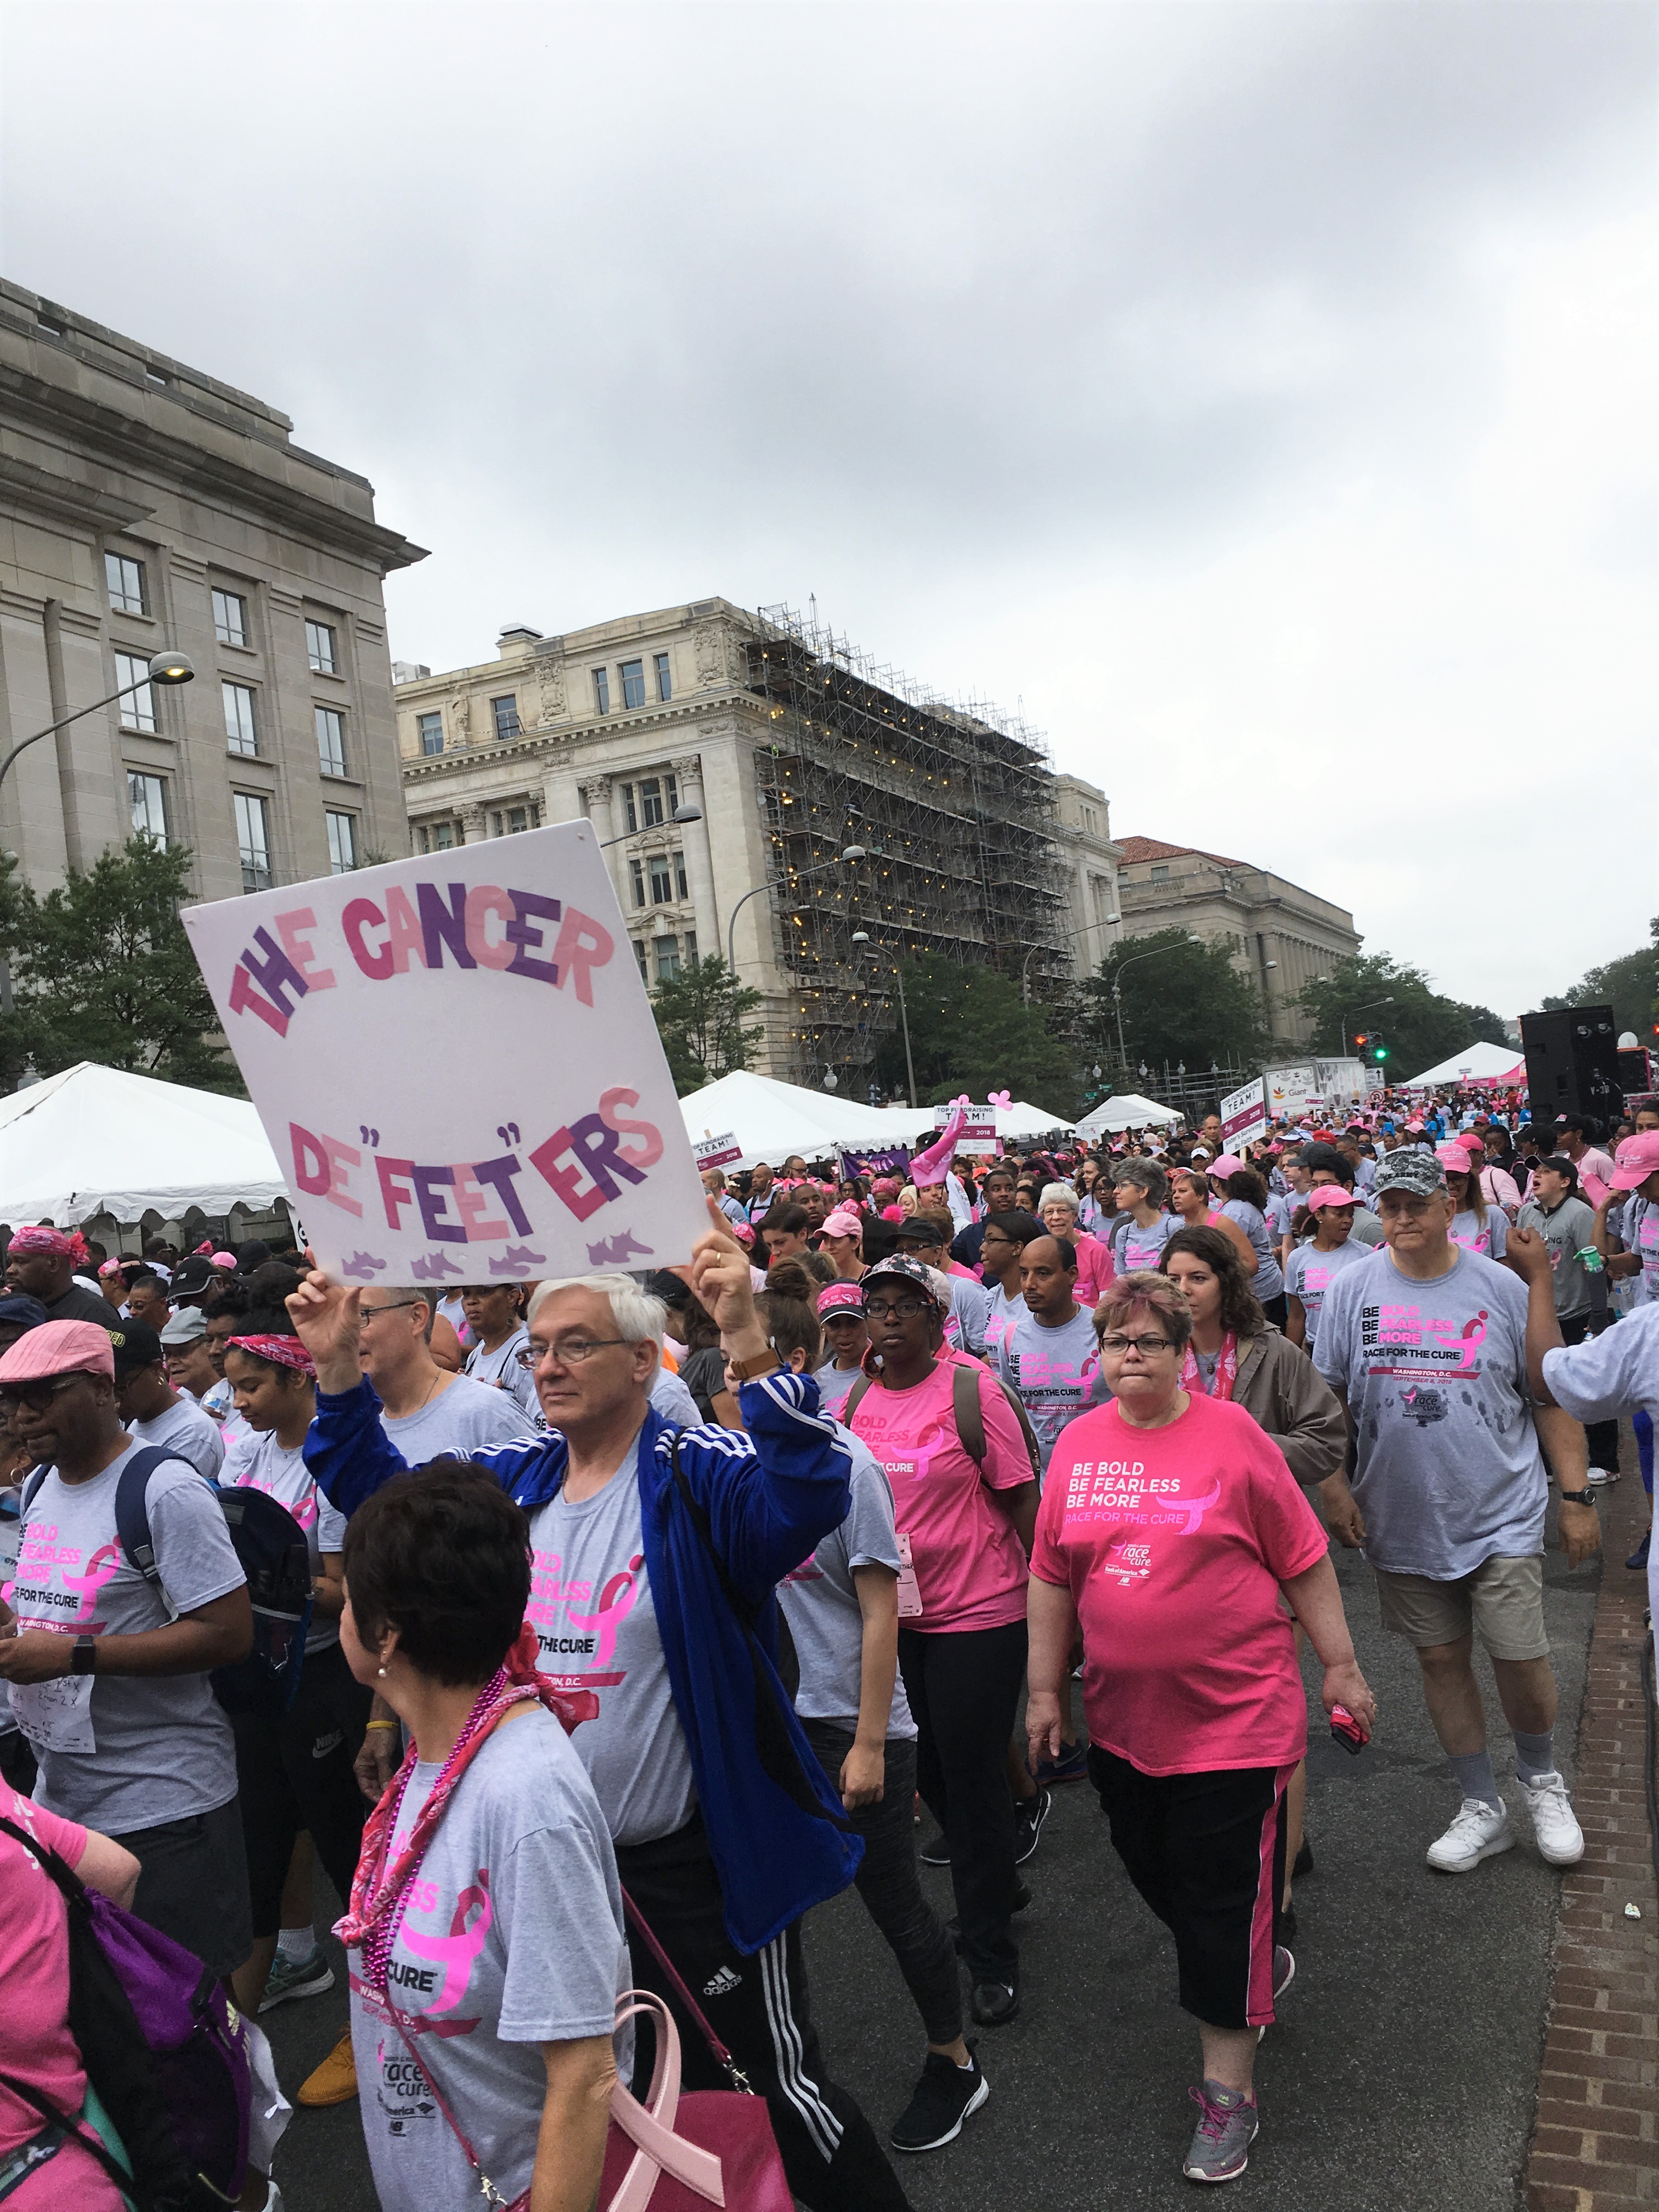 Signs for 2018 Race for a Cure